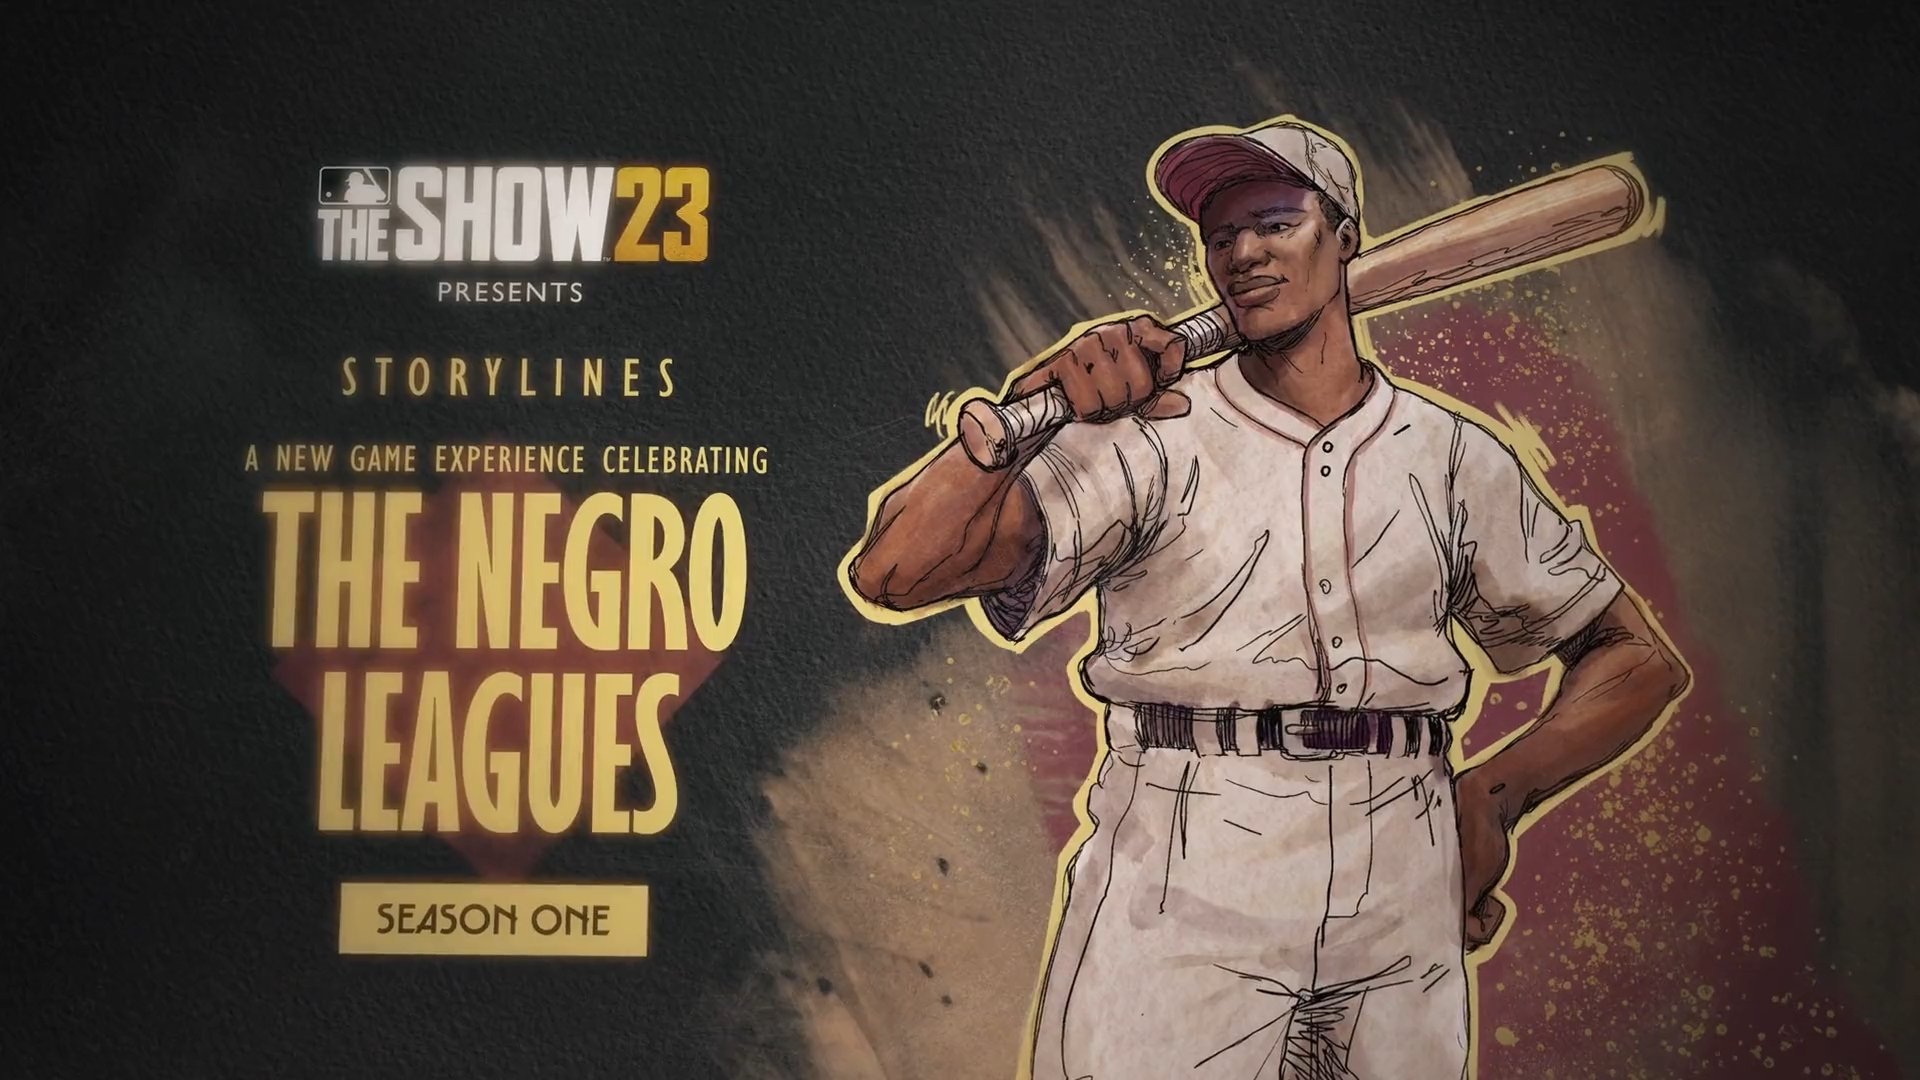 MLB The Show 23 honors the Negro Leagues with a new ingame experience